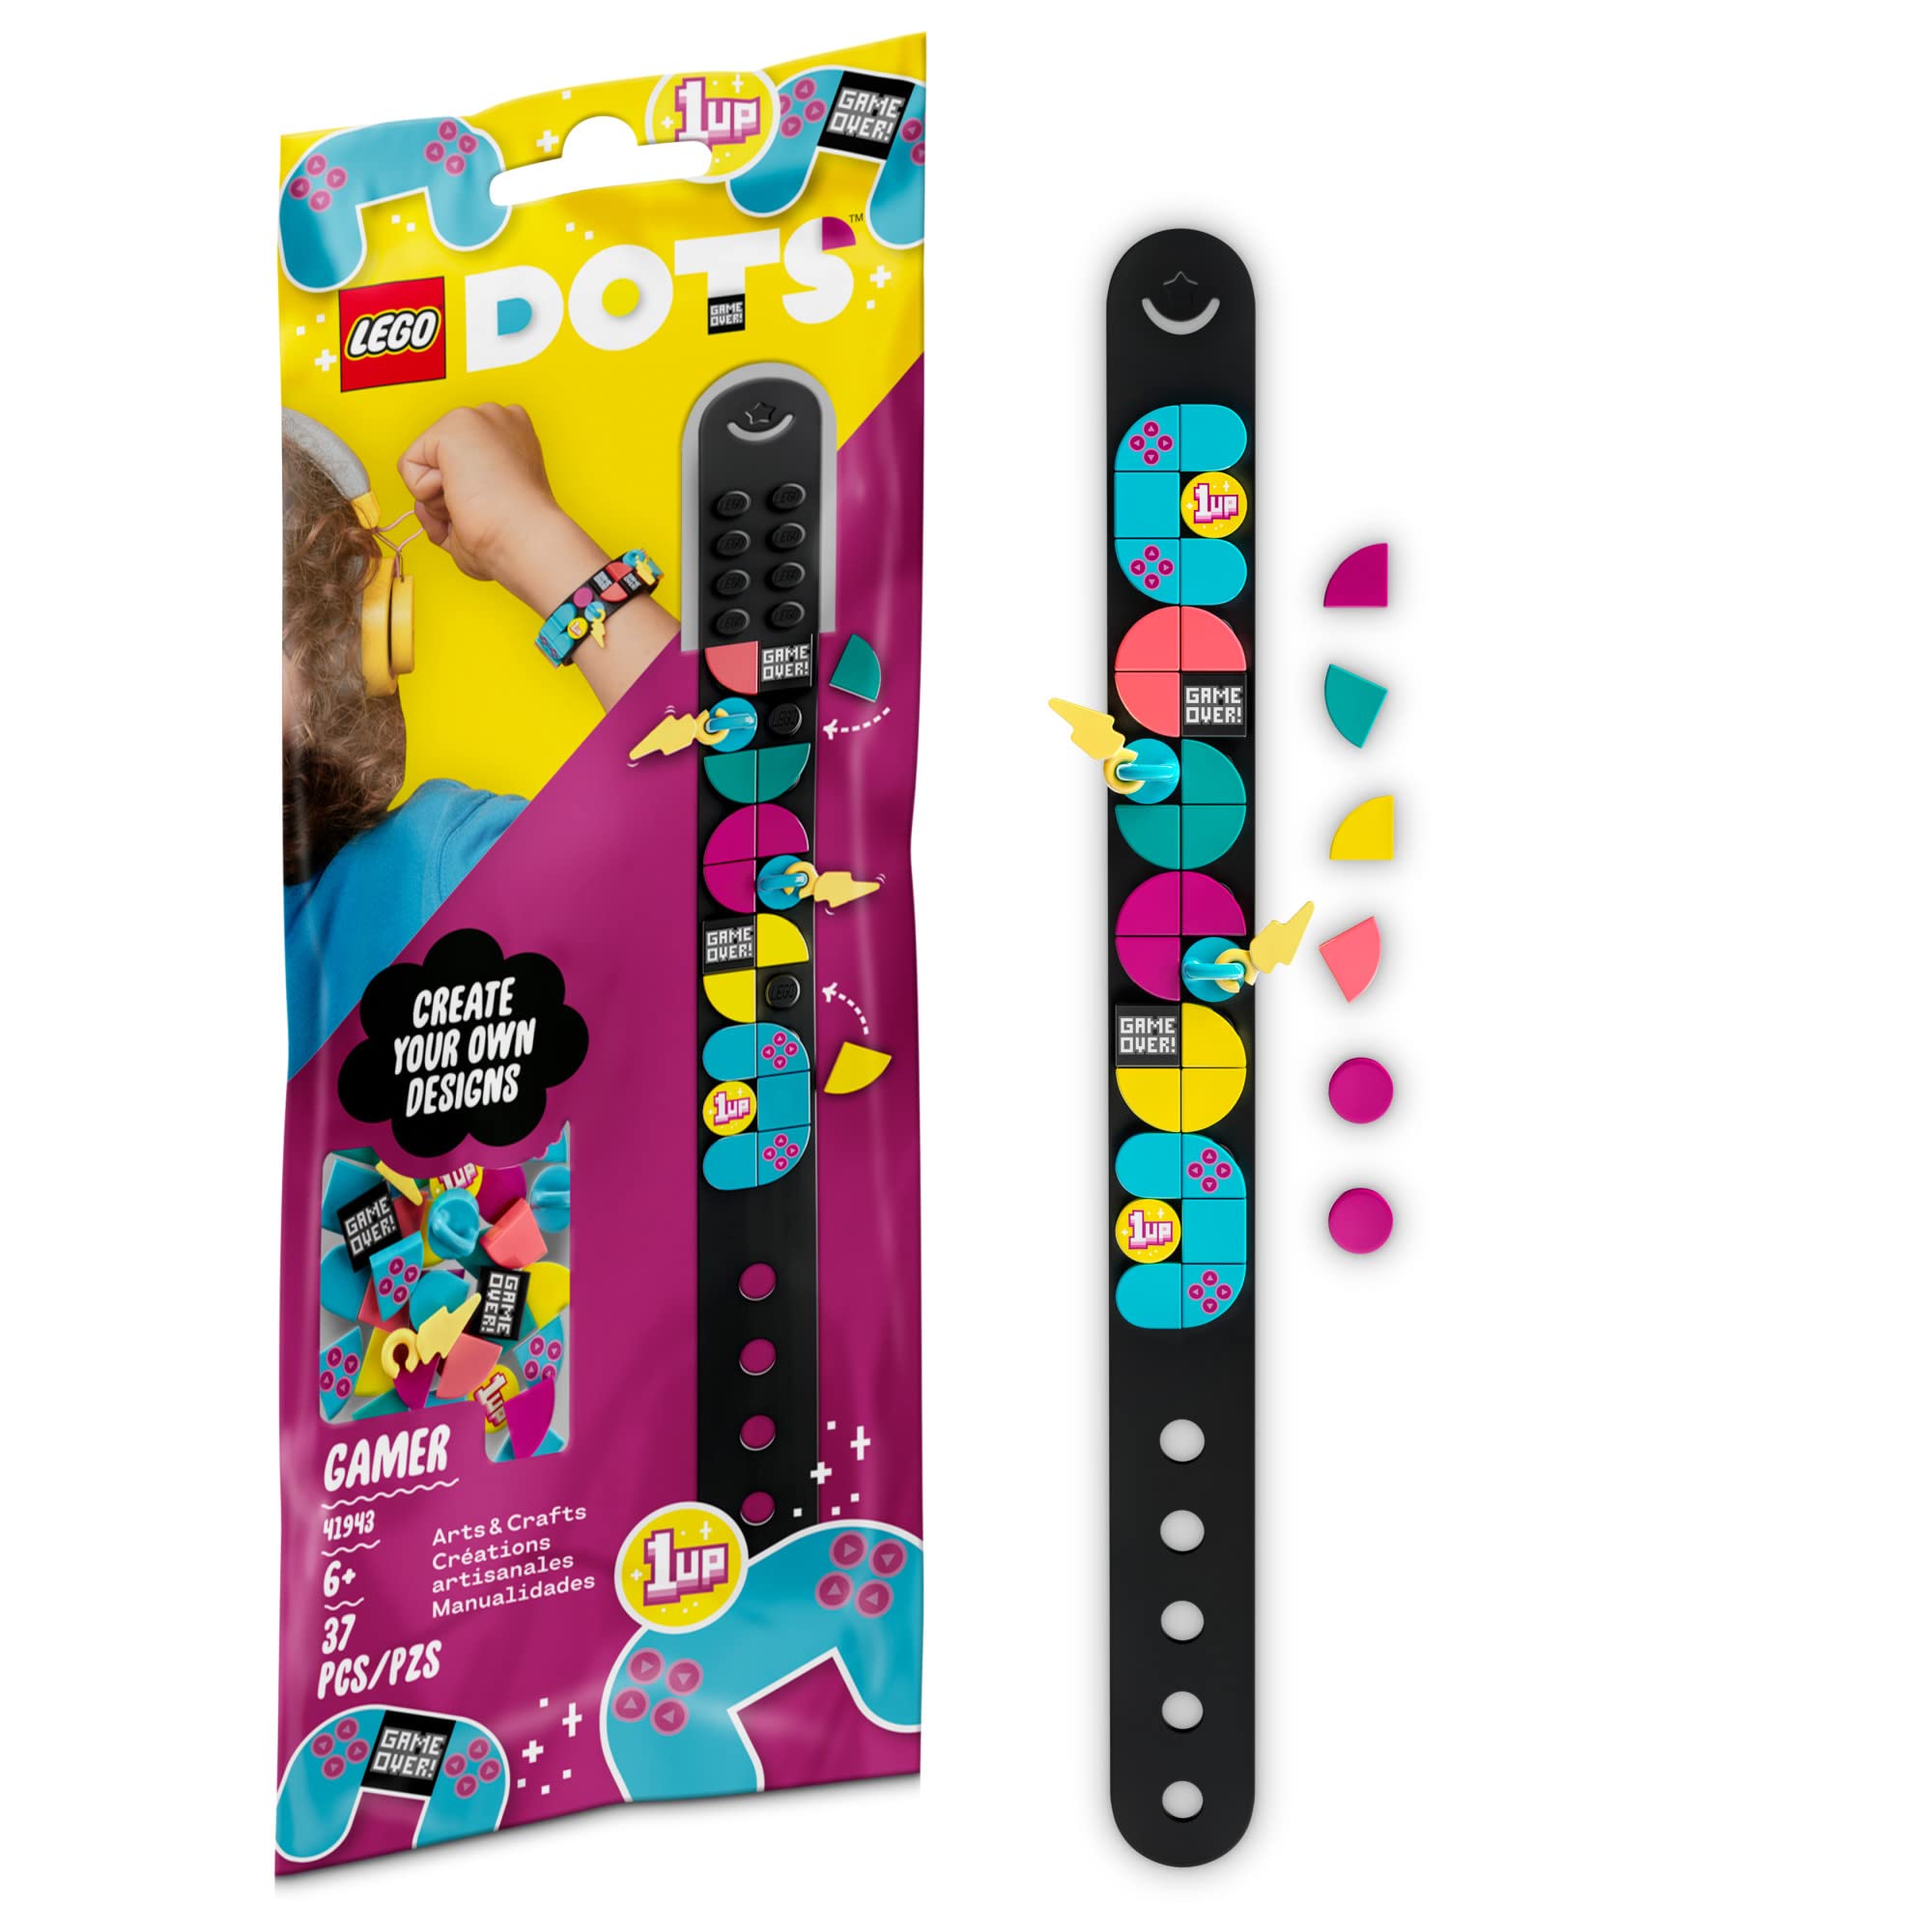 LEGO DOTS Gamer Bracelet with Charms 41943 DIY Craft Bracelet Kit; A Creative Gift for Arcade Game Fans Aged 6+ (37 Pieces)